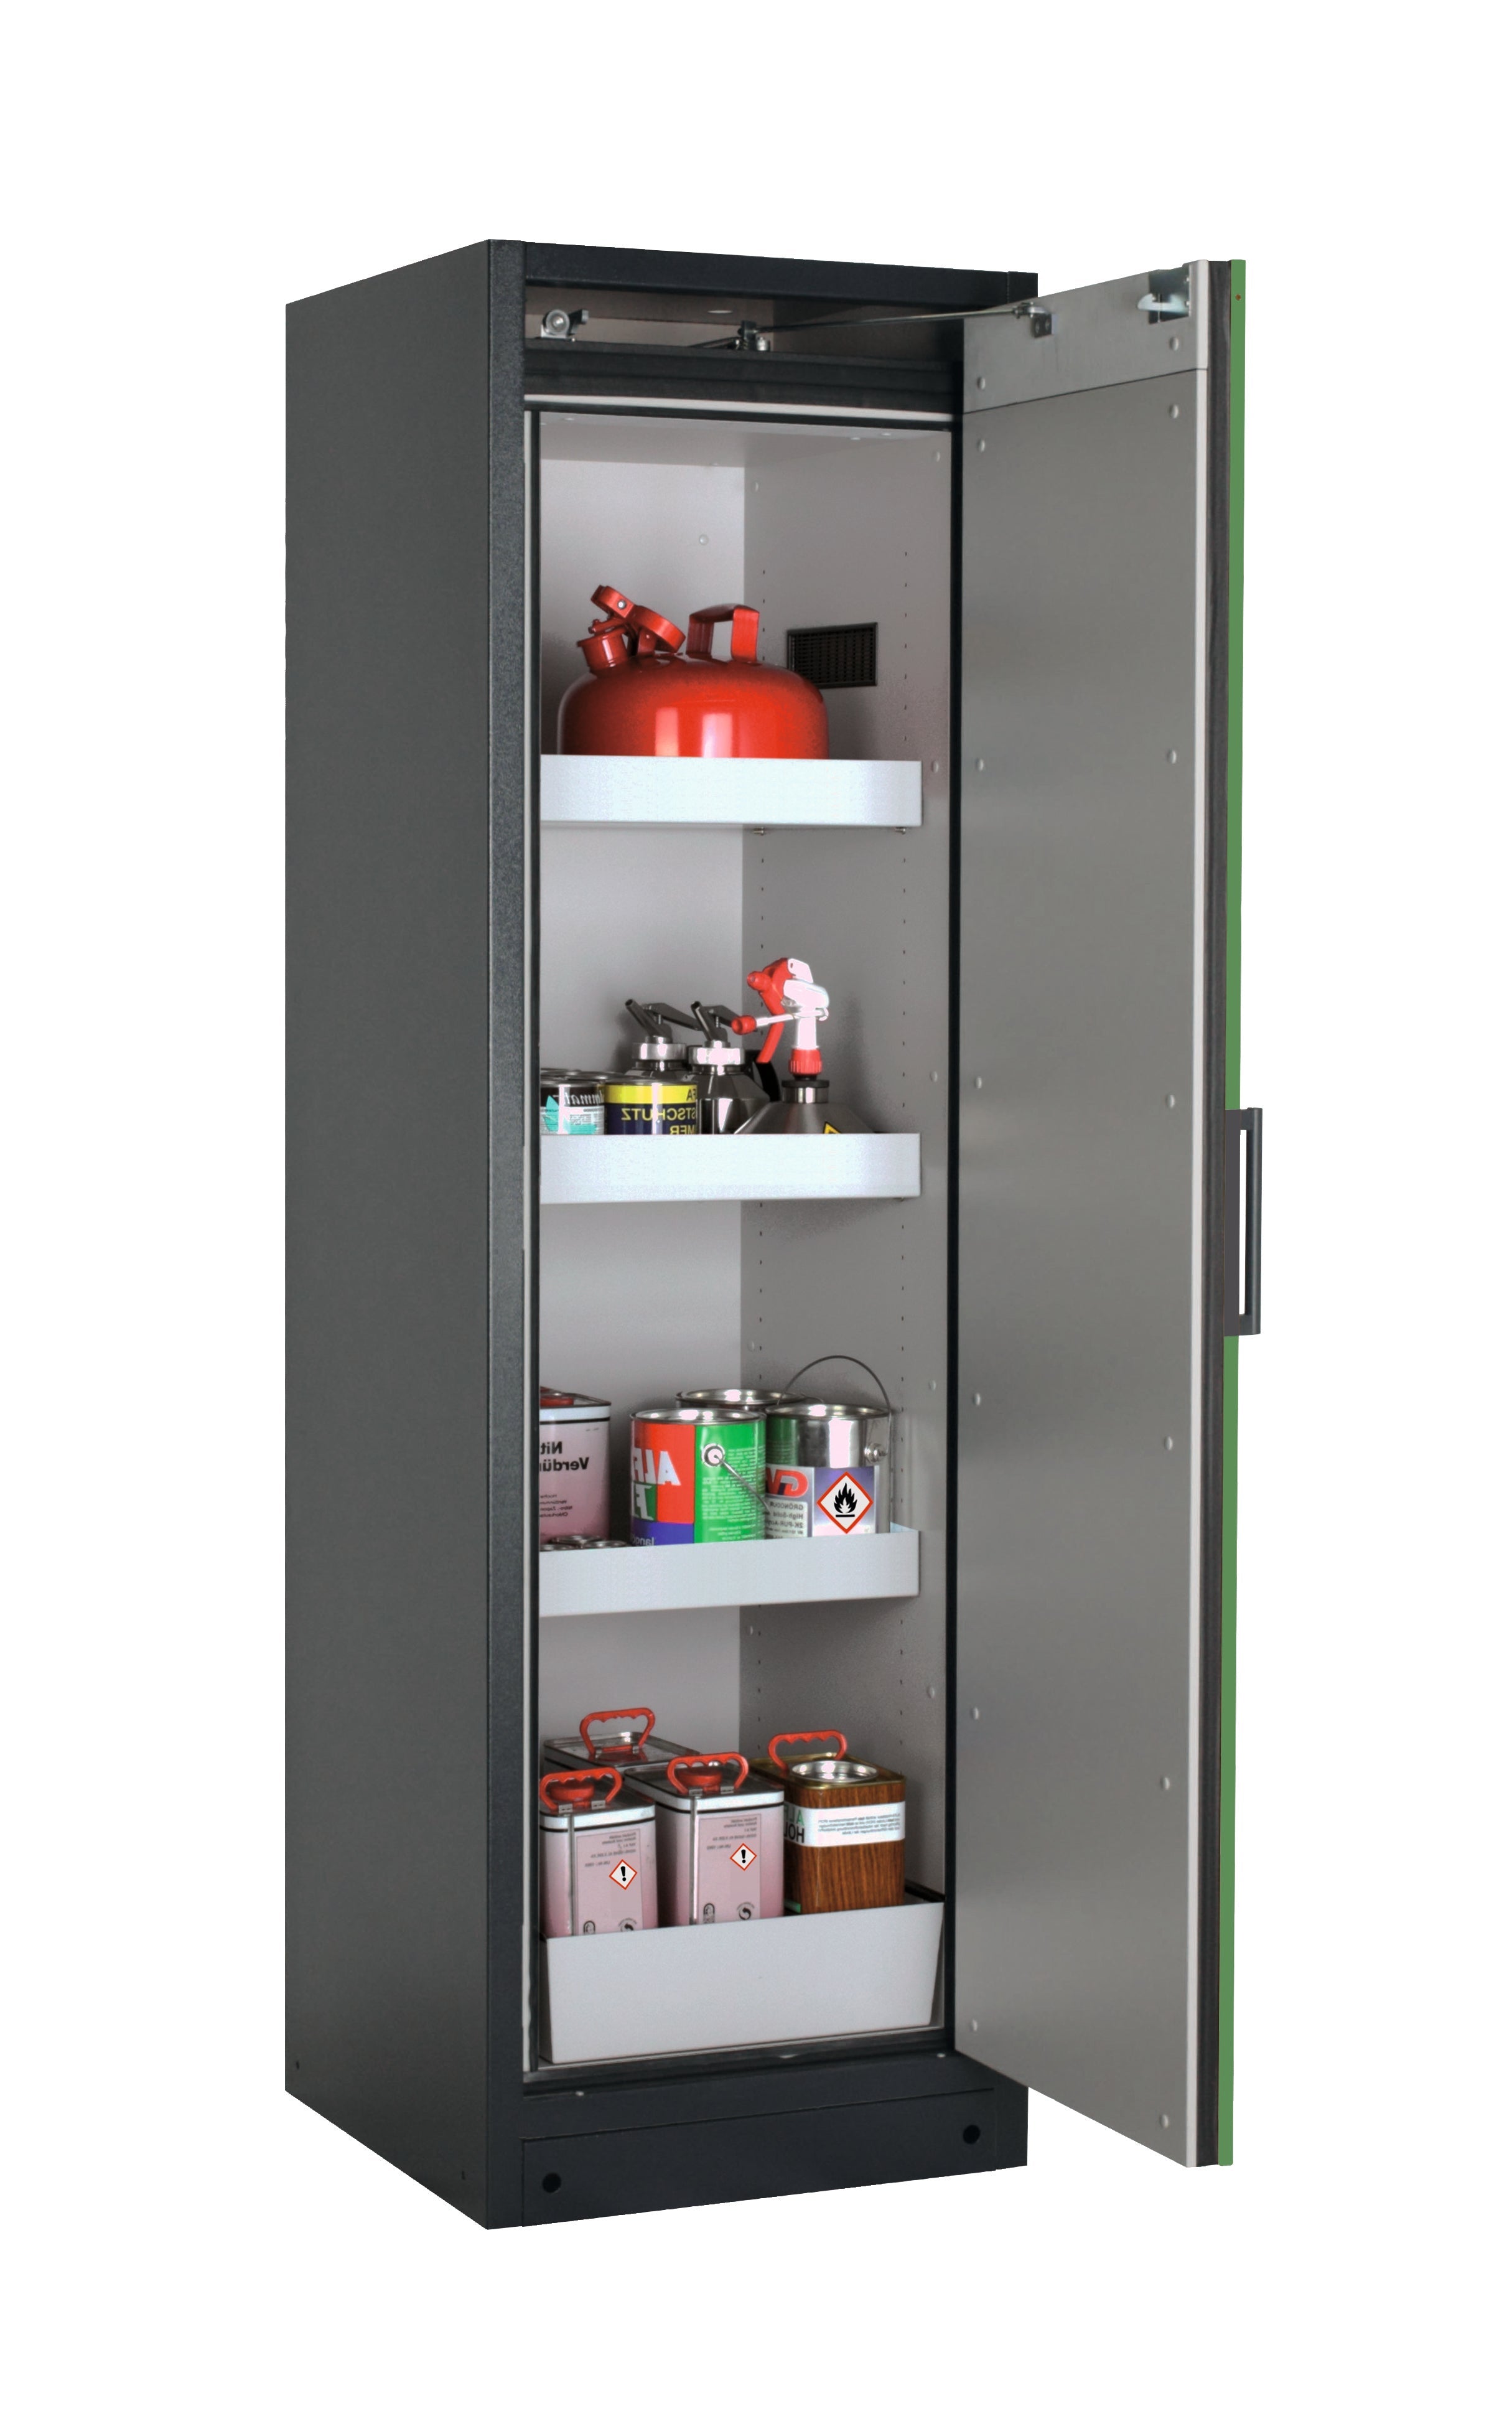 Type 90 safety storage cabinet Q-PEGASUS-90 model Q90.195.060.WDACR in reseda green RAL 6011 with 3x tray shelf (standard) (sheet steel),